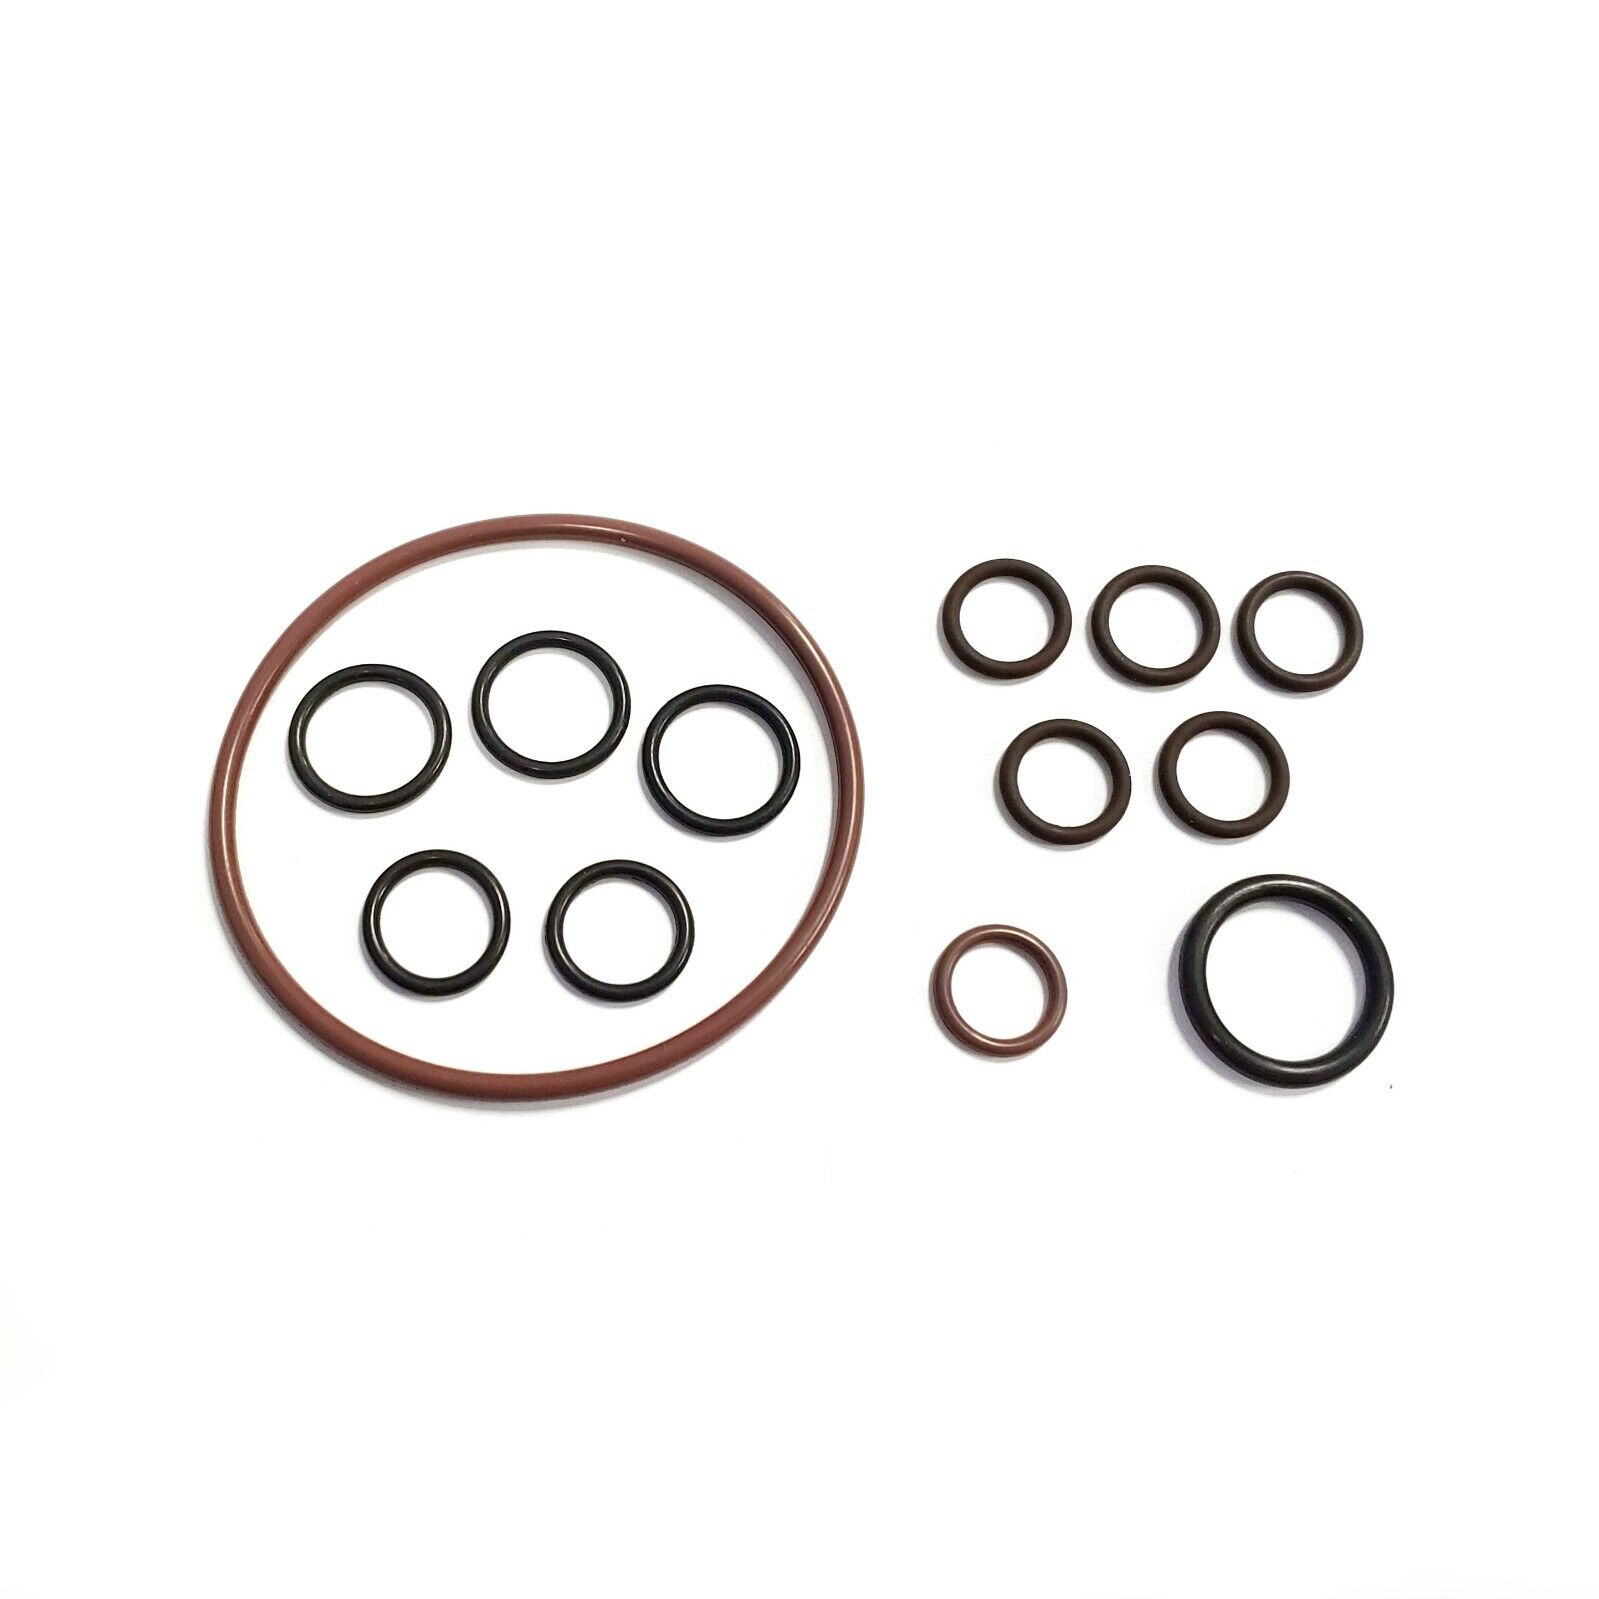 FKM O-Ring Kit for 1994.5-2003 Powerstroke 7.3 HPOP, Backplate, Fittings & IPR